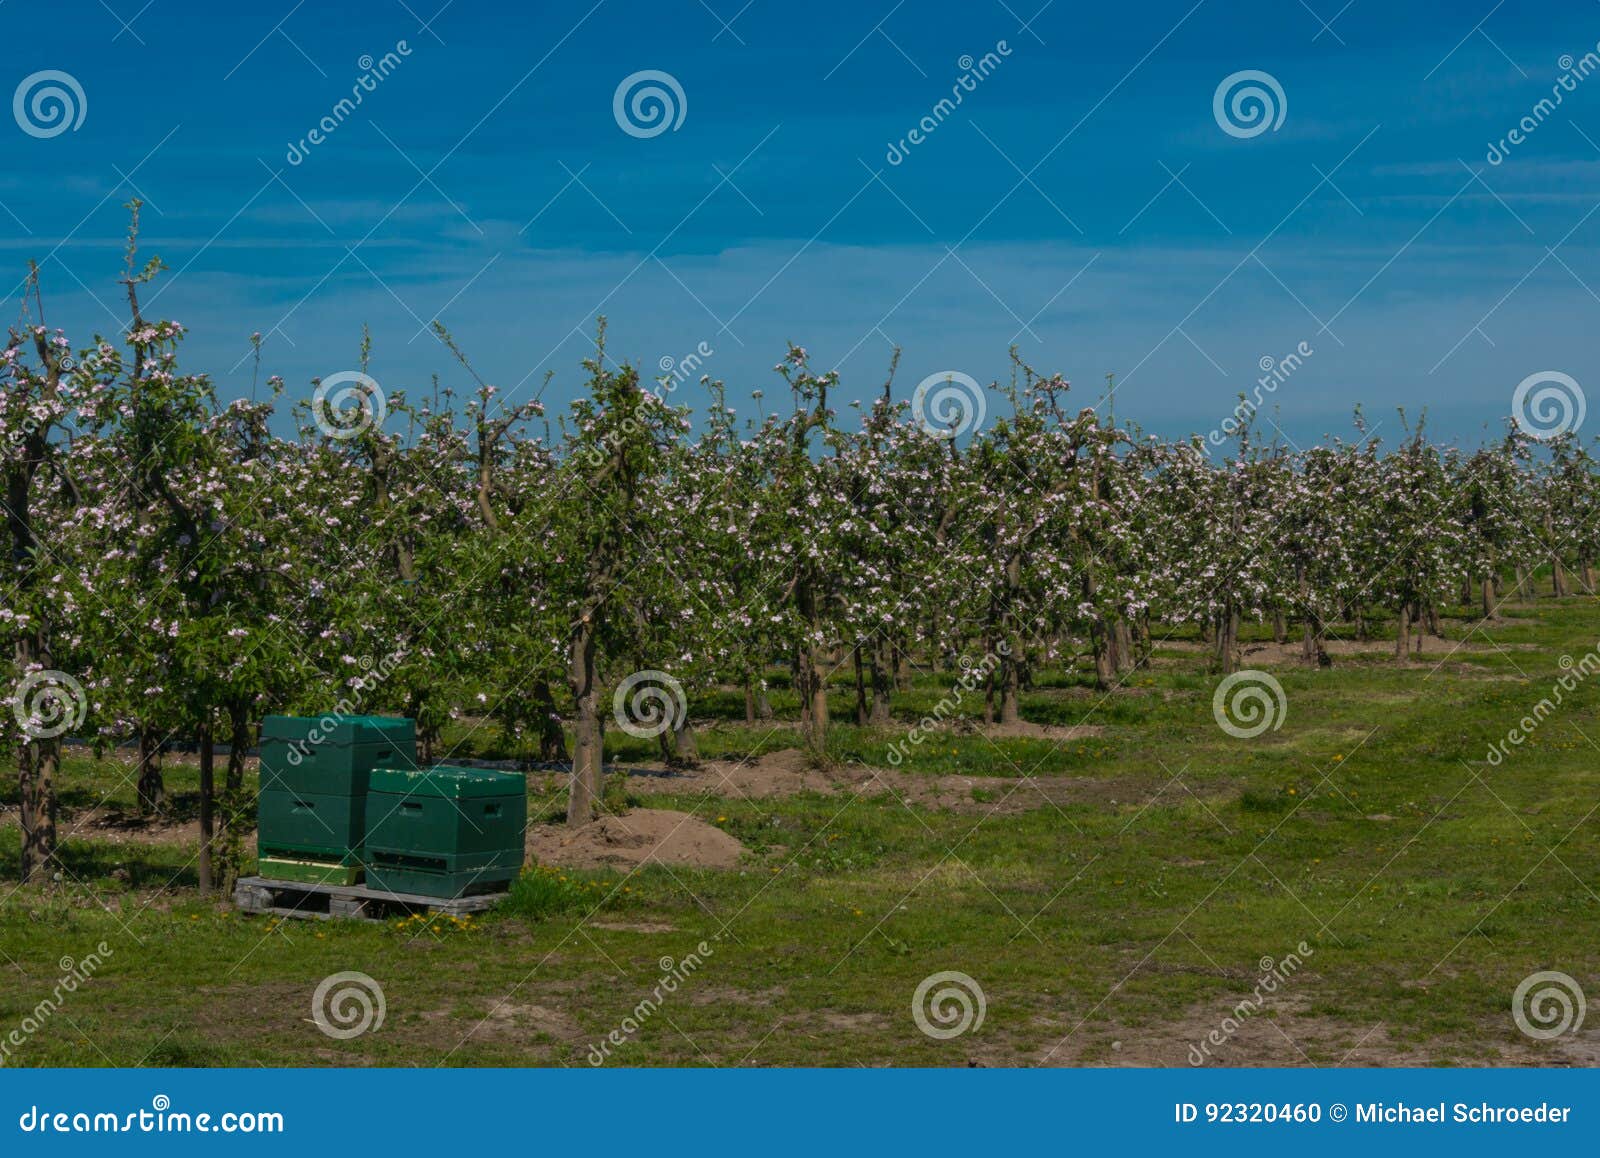 Apple blossom in a field with apple trees im Alten Land germany